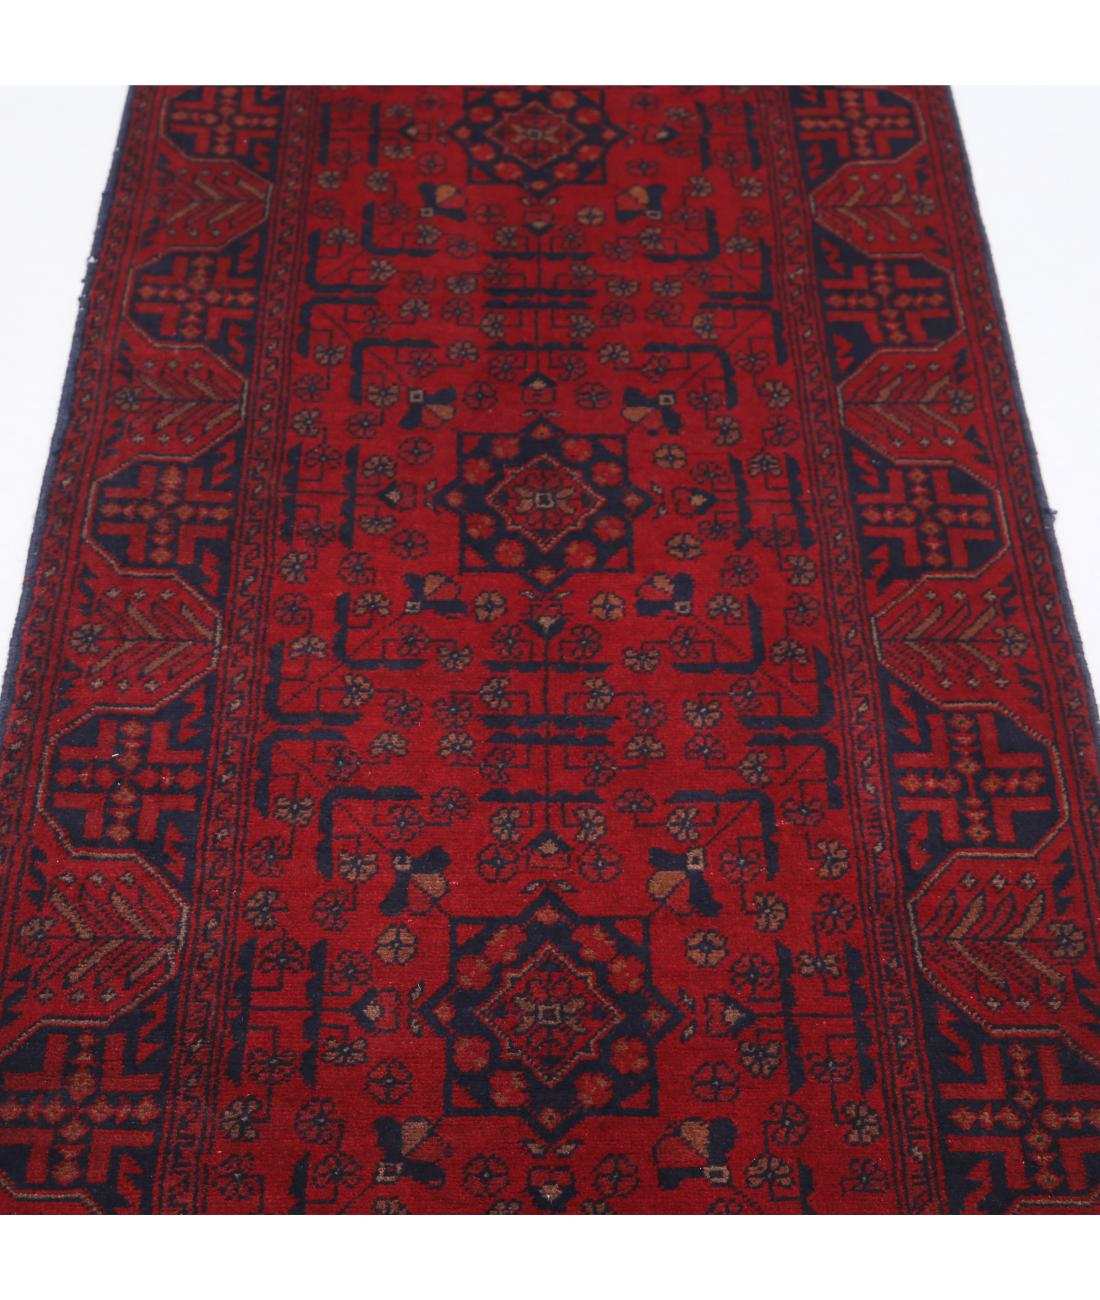 Hand Knotted Afghan Khal Muhammadi Wool Rug - 2'7'' x 9'5'' 2' 7" X 9' 5" (79 X 287) / Red / Blue